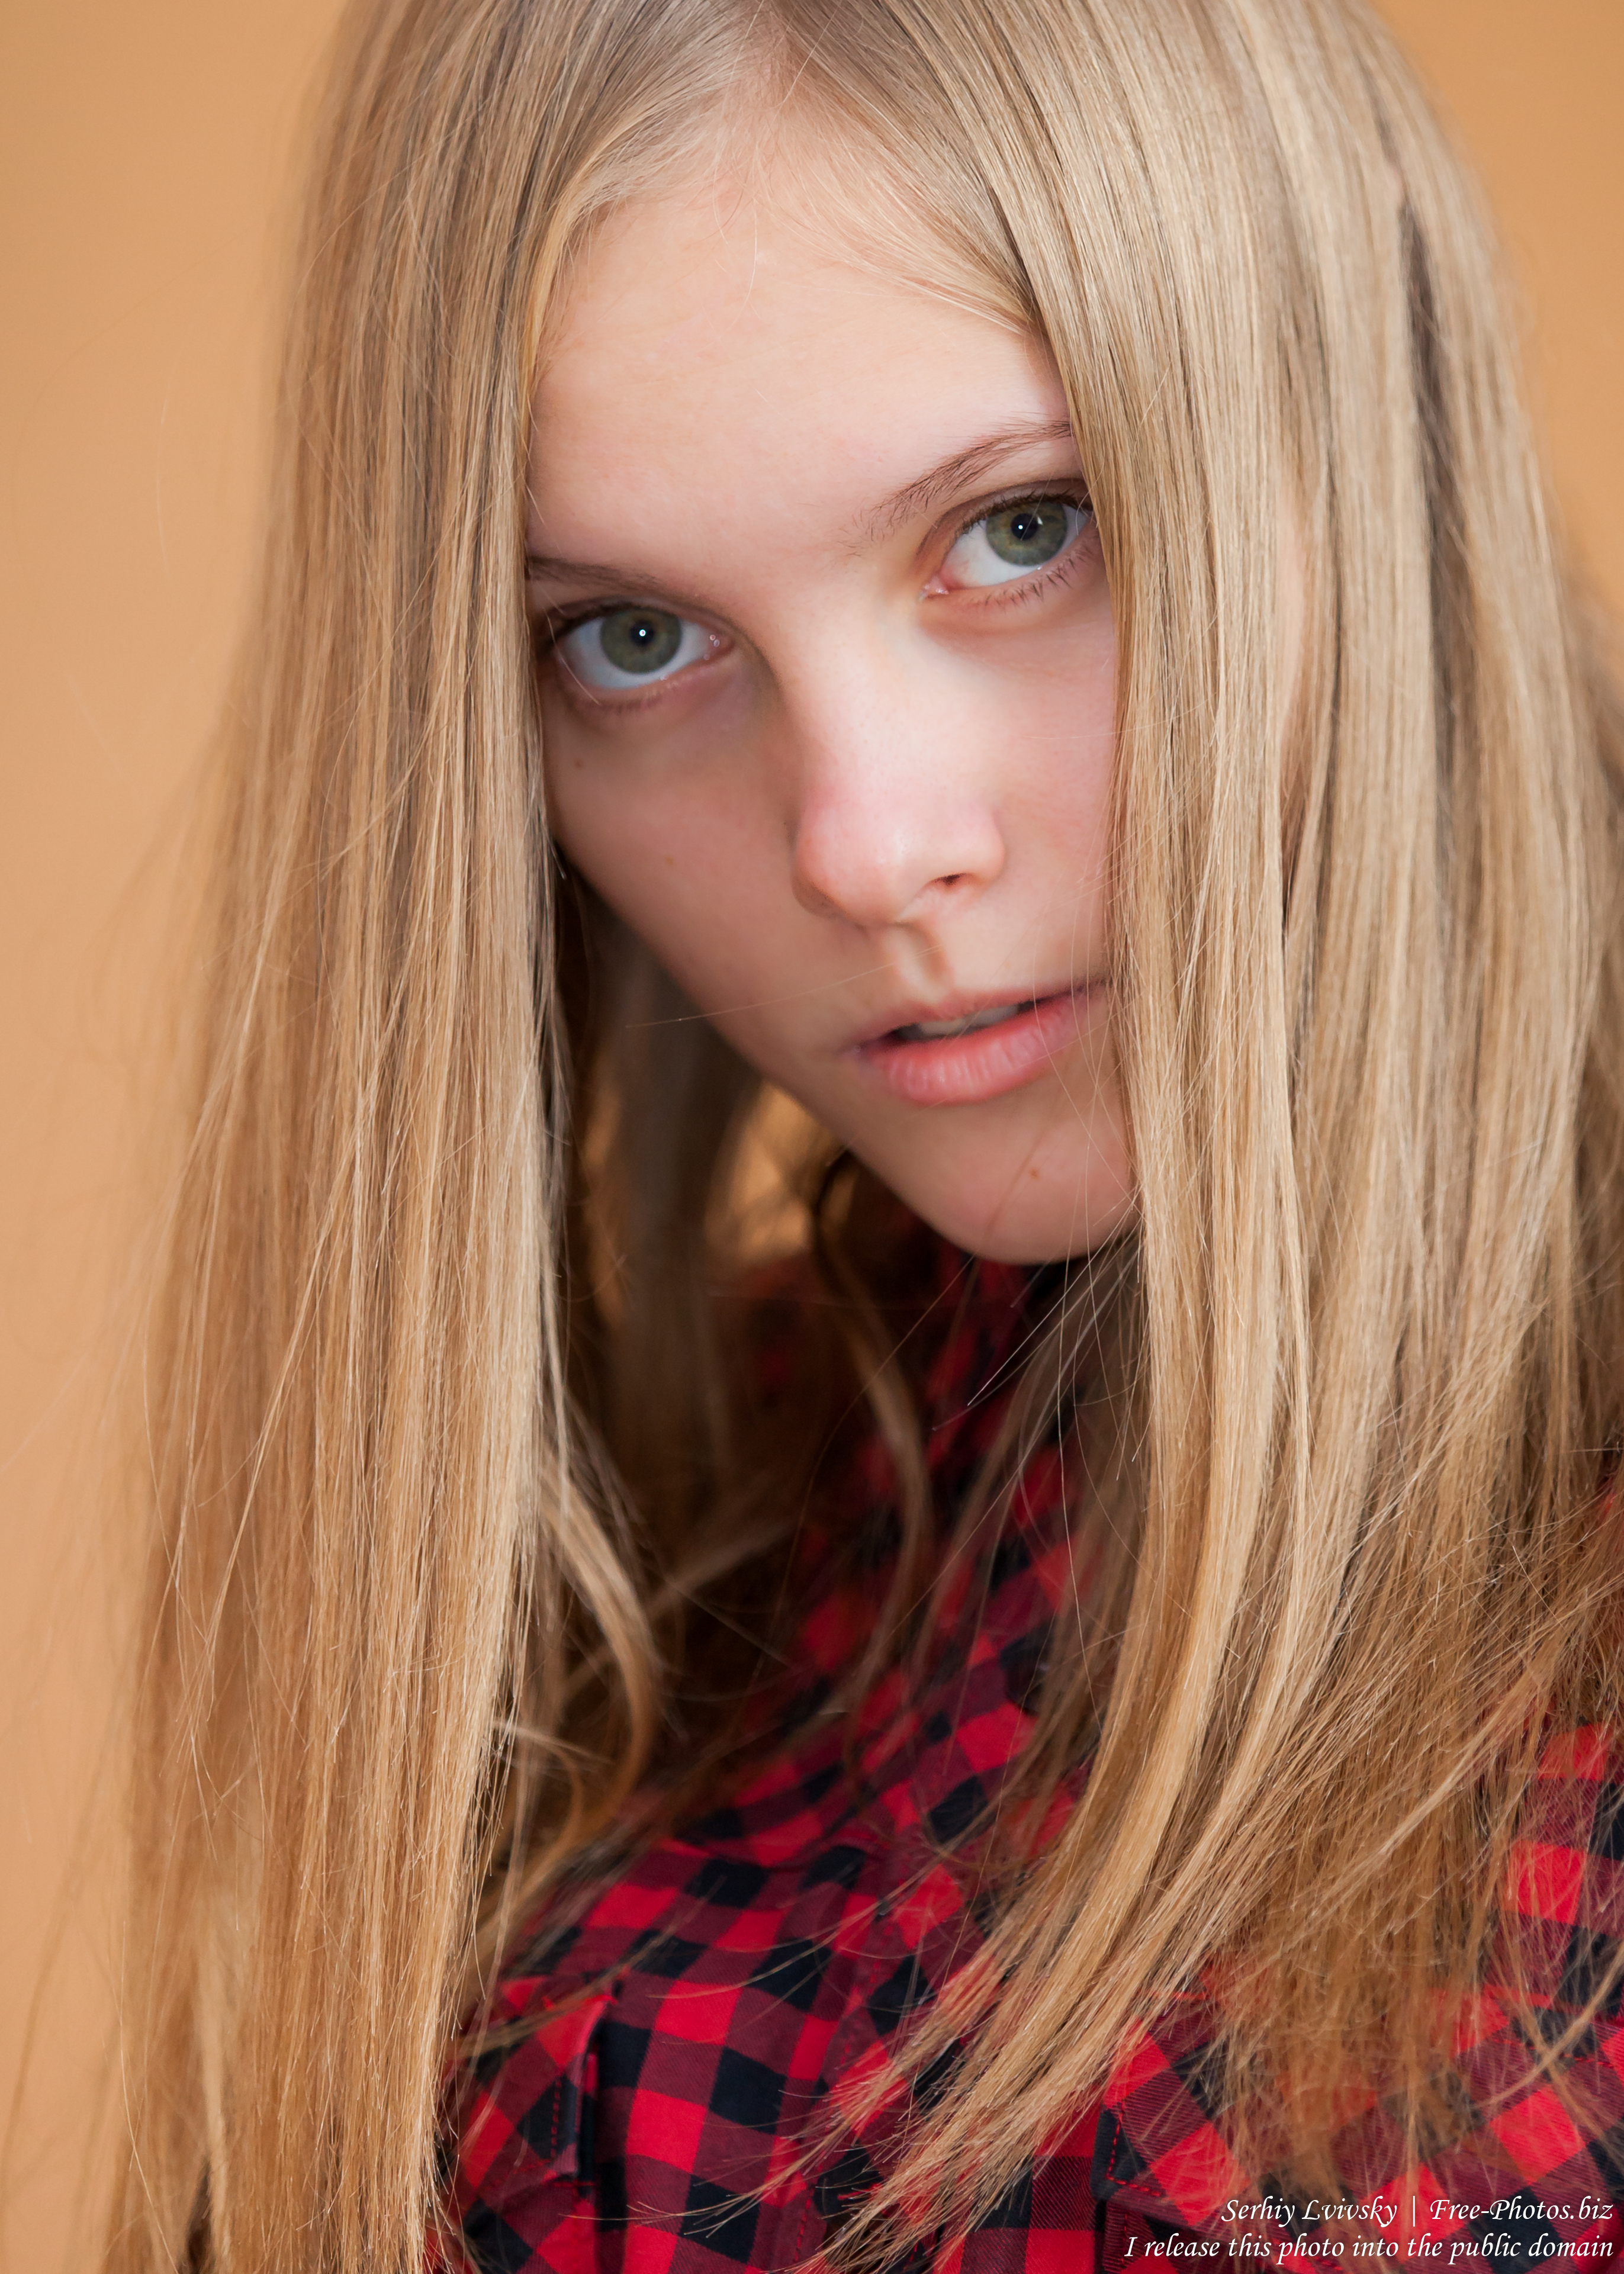 a 15-year-old blond girl photographed by Serhiy Lvivsky in November 2015, picture 1